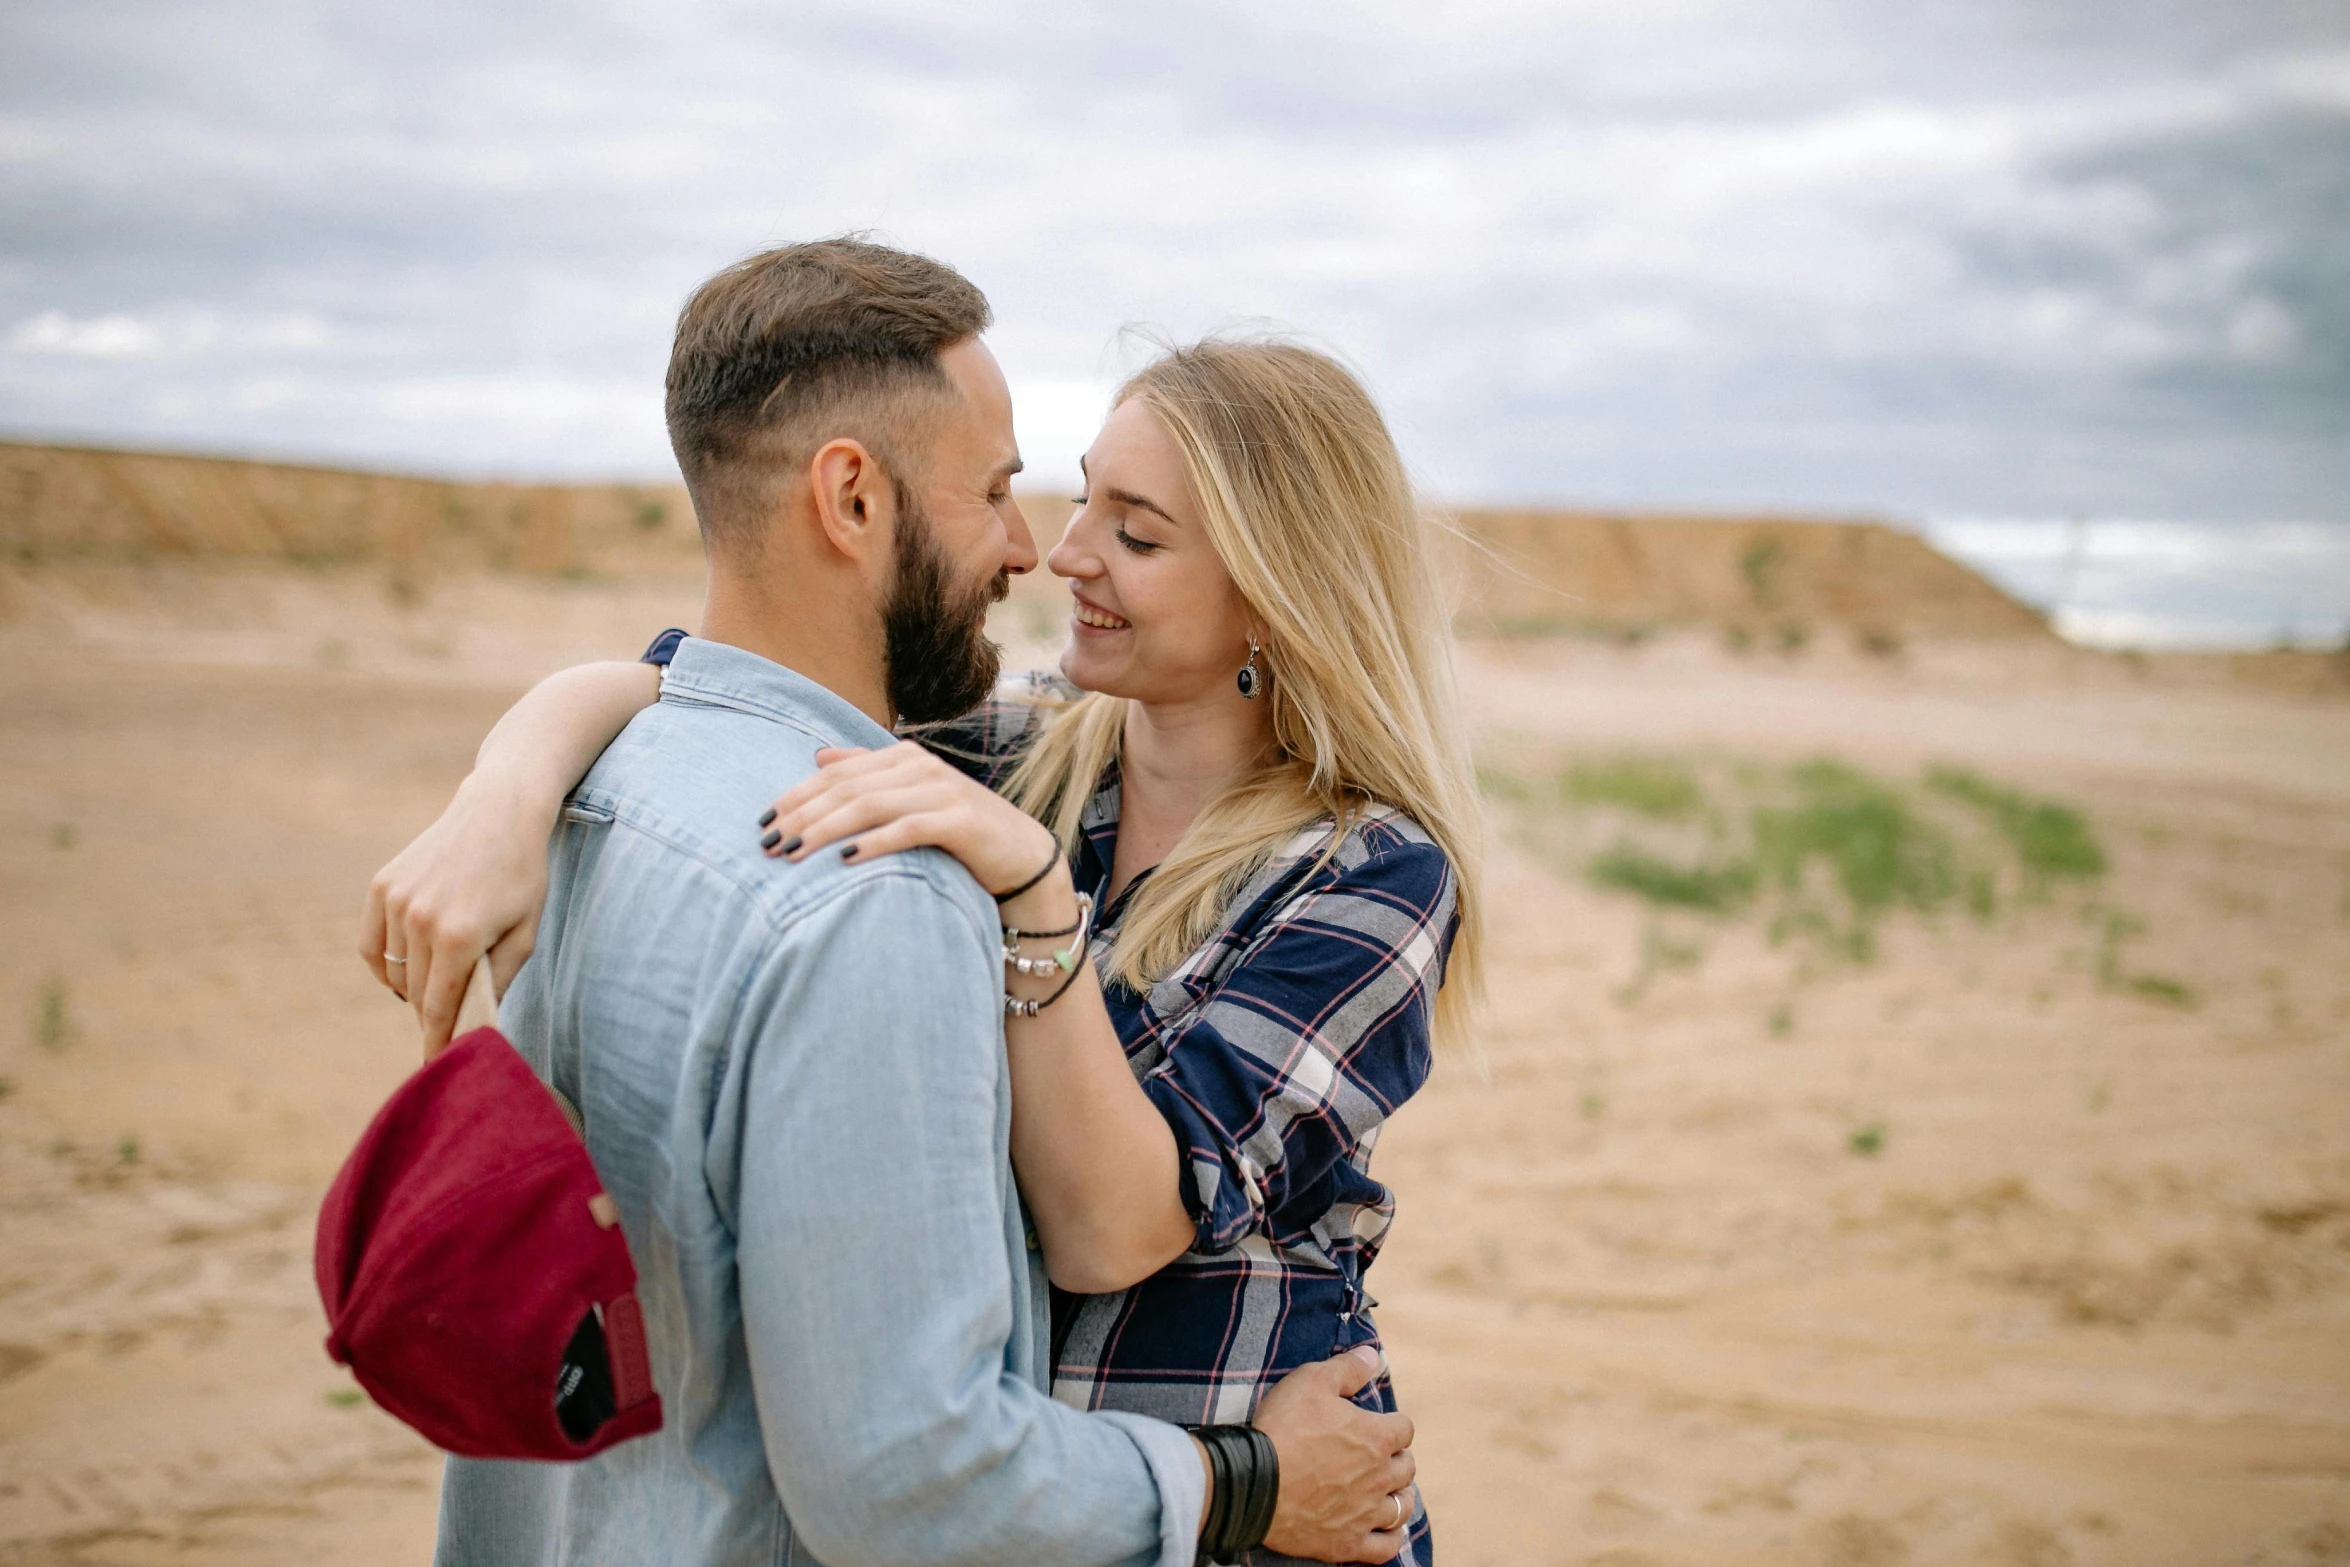 a man and woman smile and hug in the middle of a desert